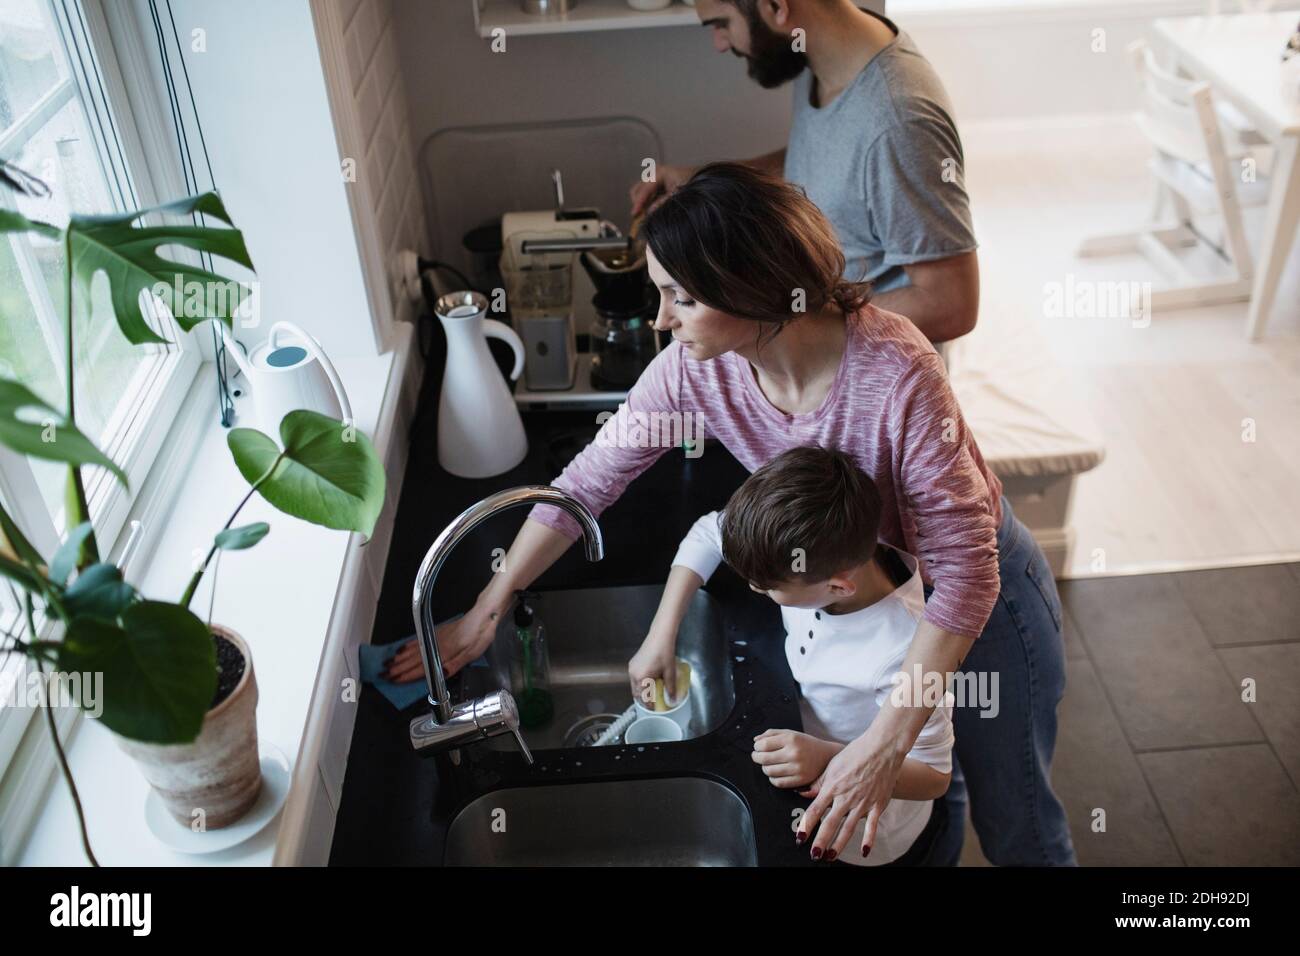 High angle view of man standing by woman cleaning counter while boy washing dishes in kitchen Stock Photo